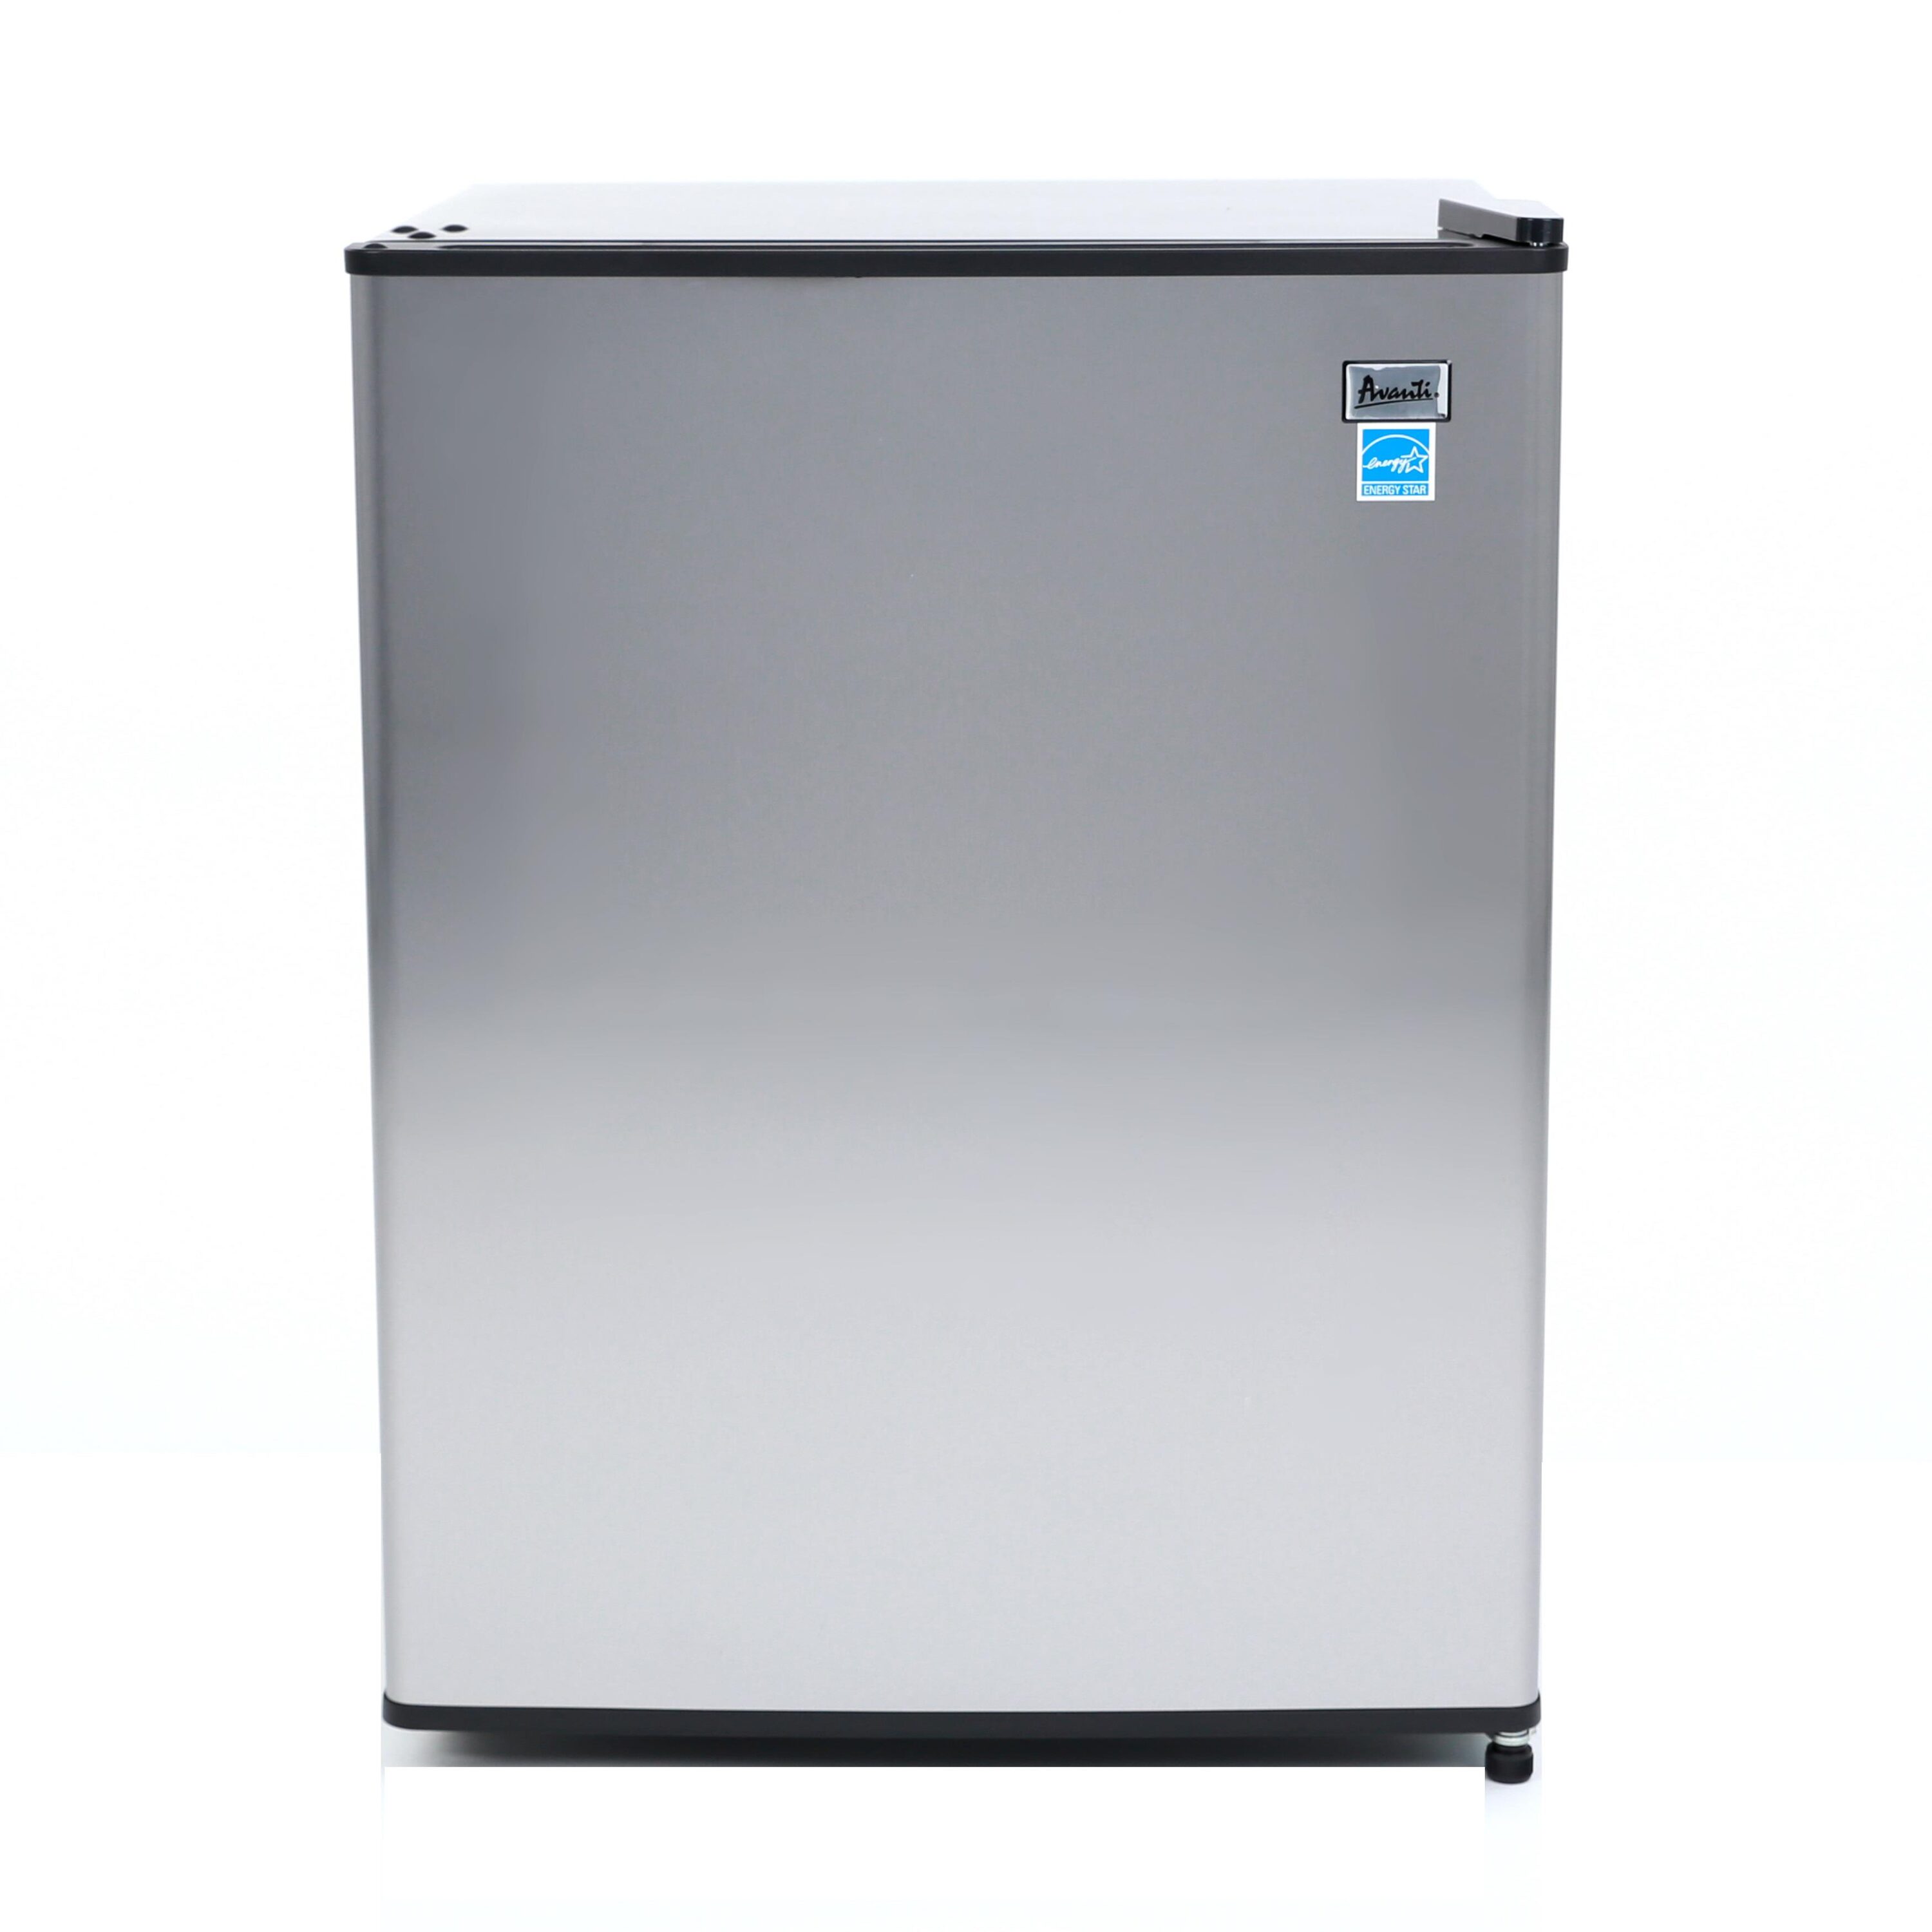 Avanti AR24T3S 2.4 Cu. ft. Stainless Steel Compact Refrigerator